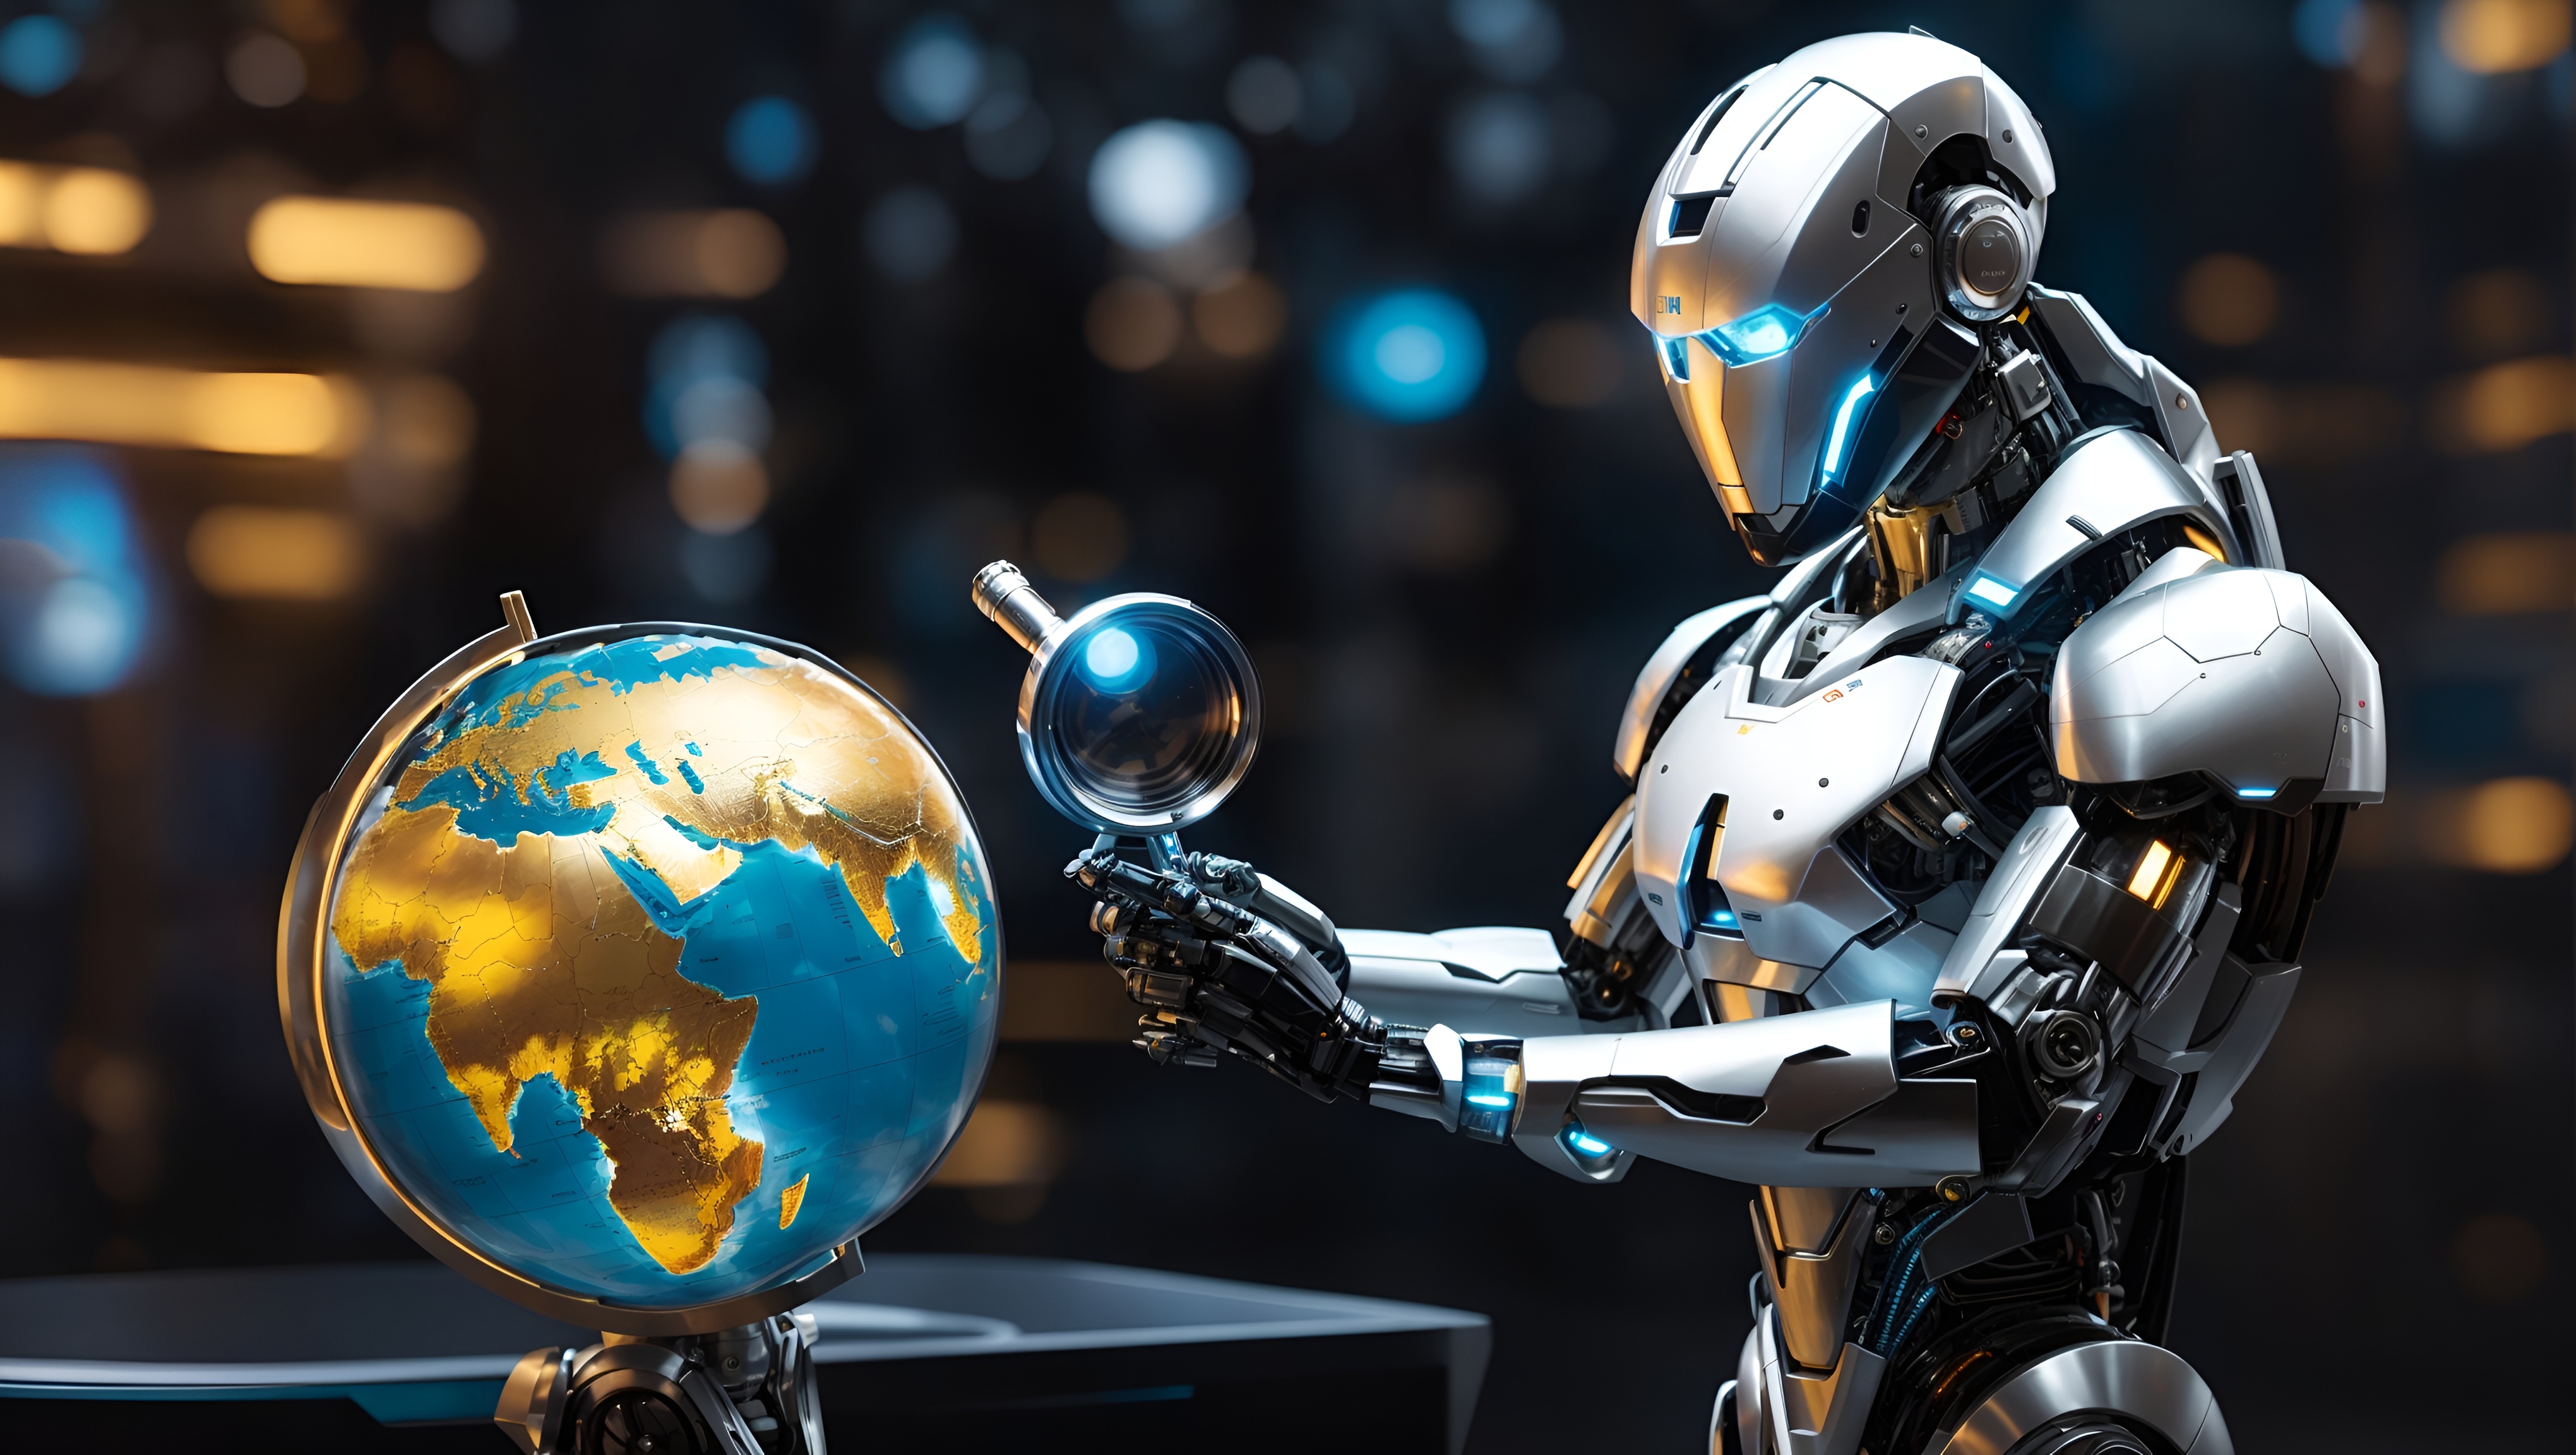 A humanoid robot with sleek metallic features stands in a confident posture. In one hand, it holds a magnifying glass, symbolizing the process of web crawling and data collection. In the other hand, it delicately hovers over a lit-up globe, signifying the global reach of the internet and data acquisition.